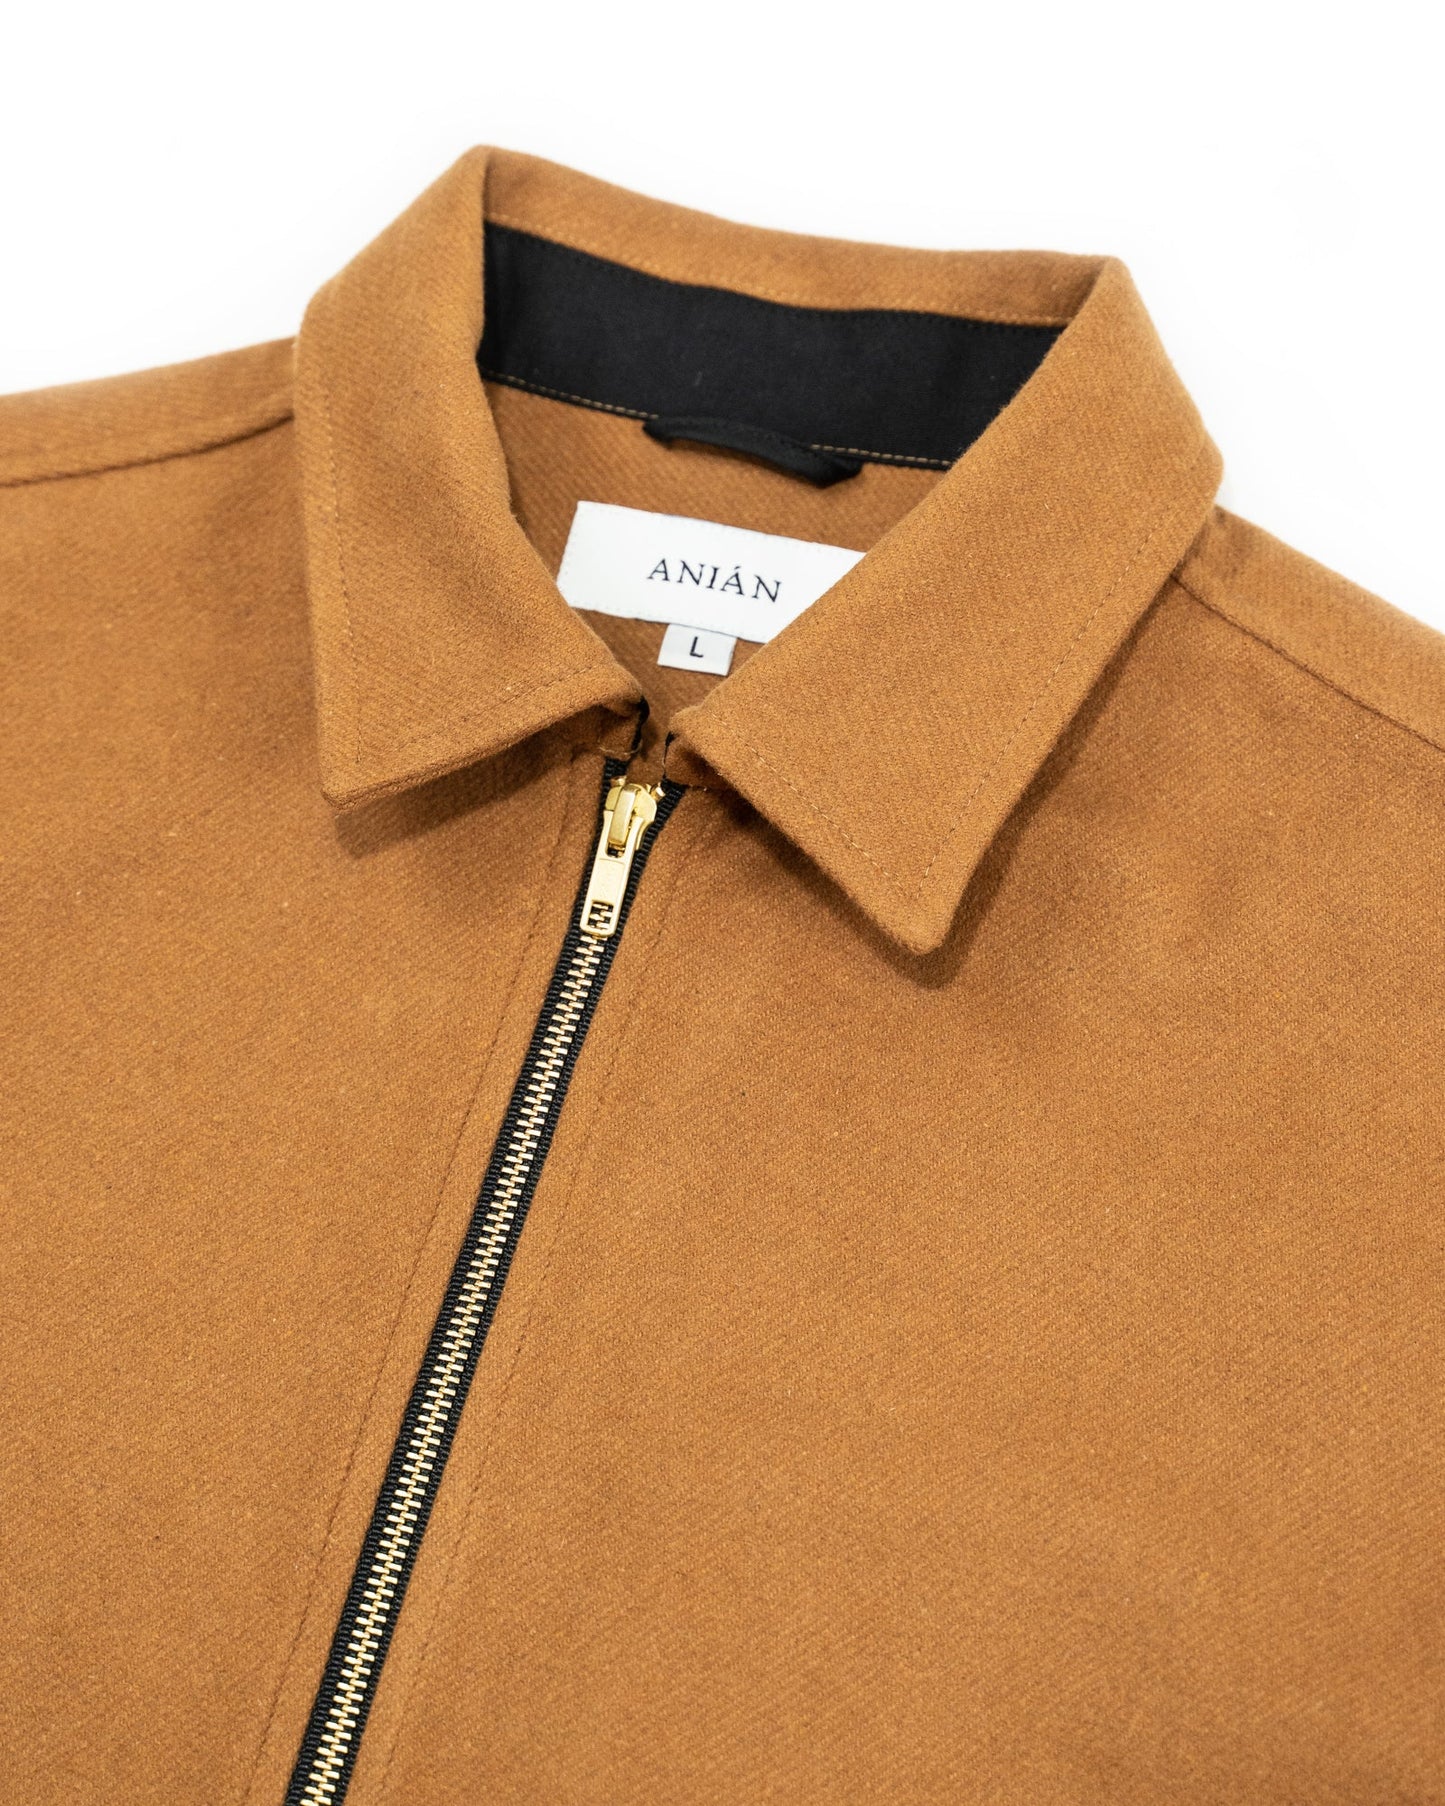 Anián - SS24 - The Eddie Coat in Timber - close-up collar 6